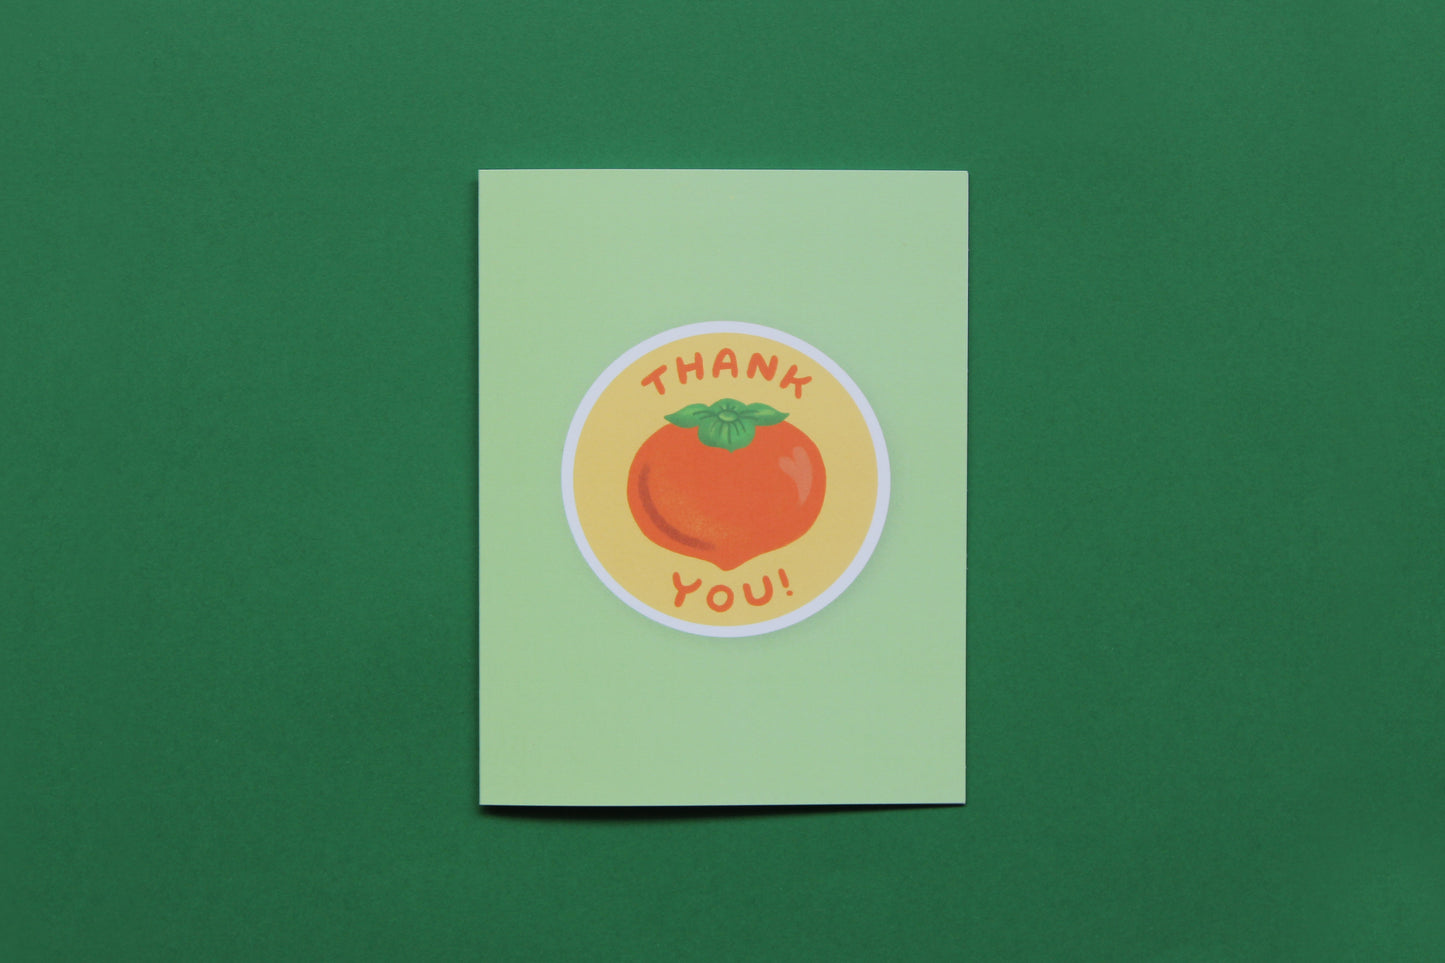 A photo of a green greeting card with a persimmon that says "Thank you" on a green background.